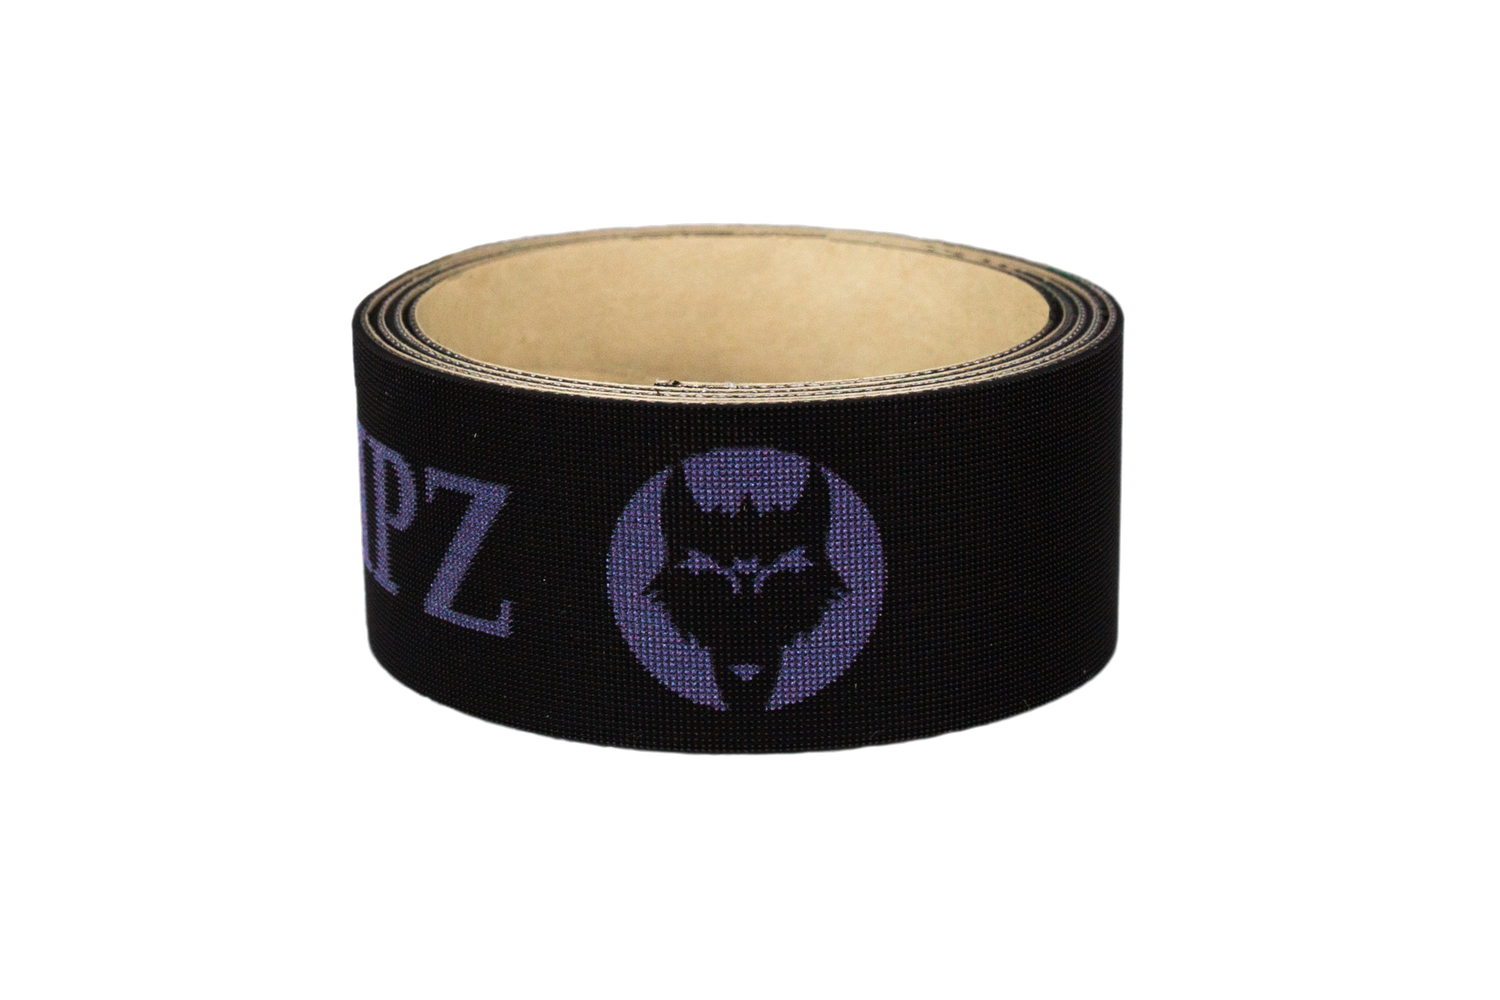 VukGripz Black Bat Grip Tape with Purple logos is American Made, Thin, and Durable on roll bat tape